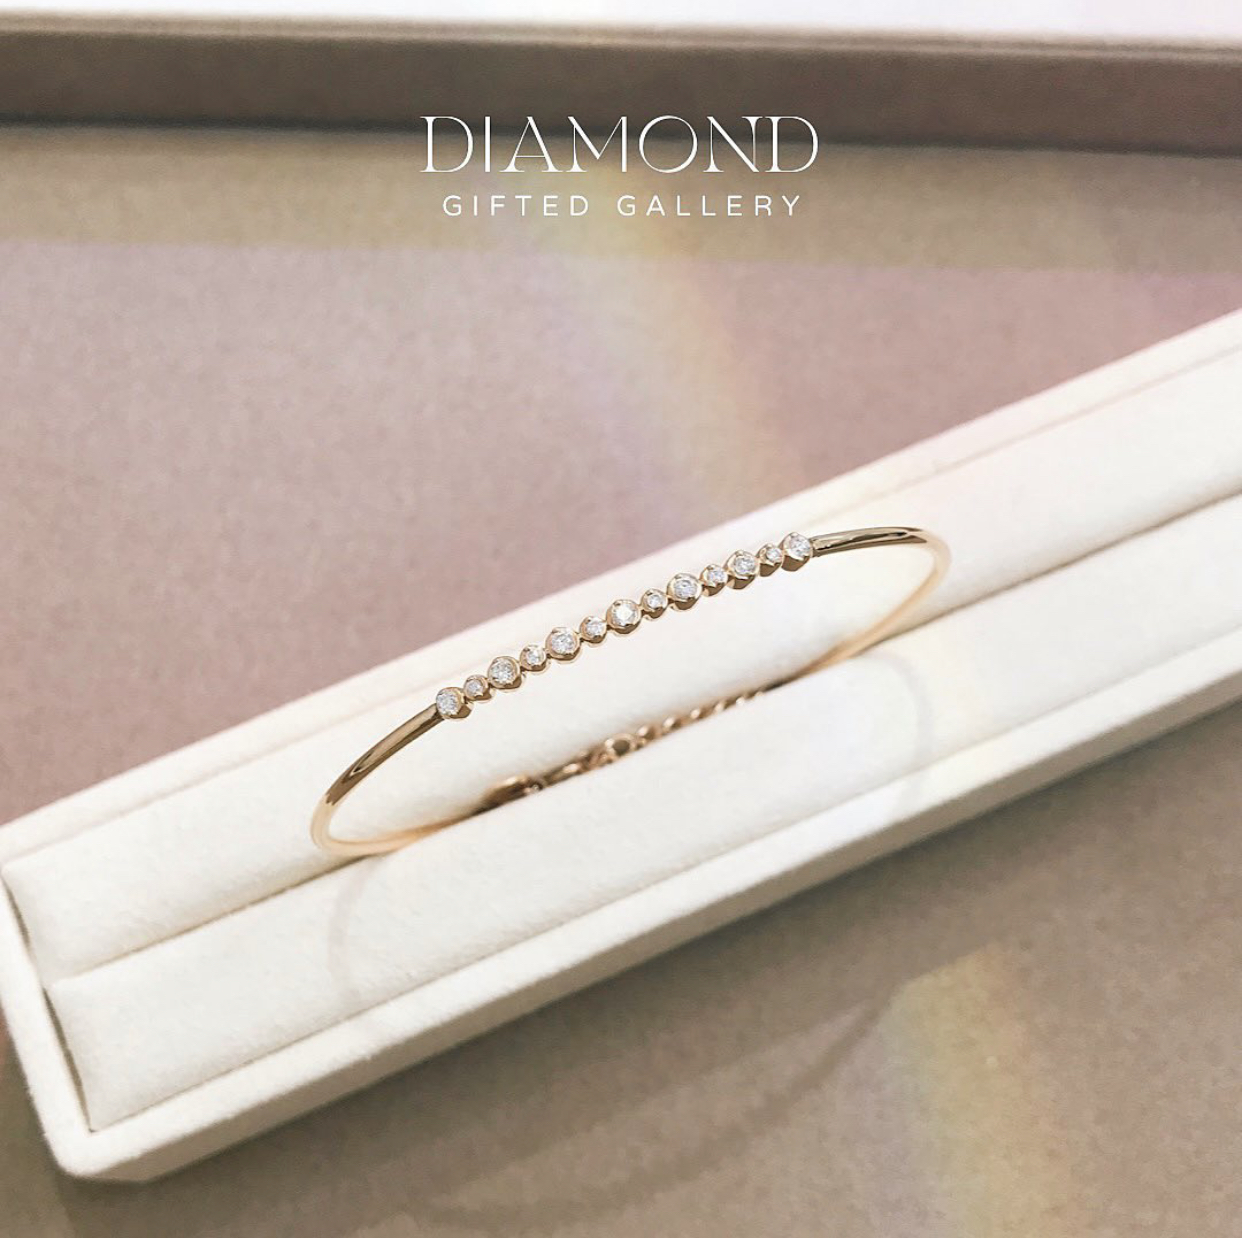 0.20ct Diamond Bracelet by Gifted Gallery